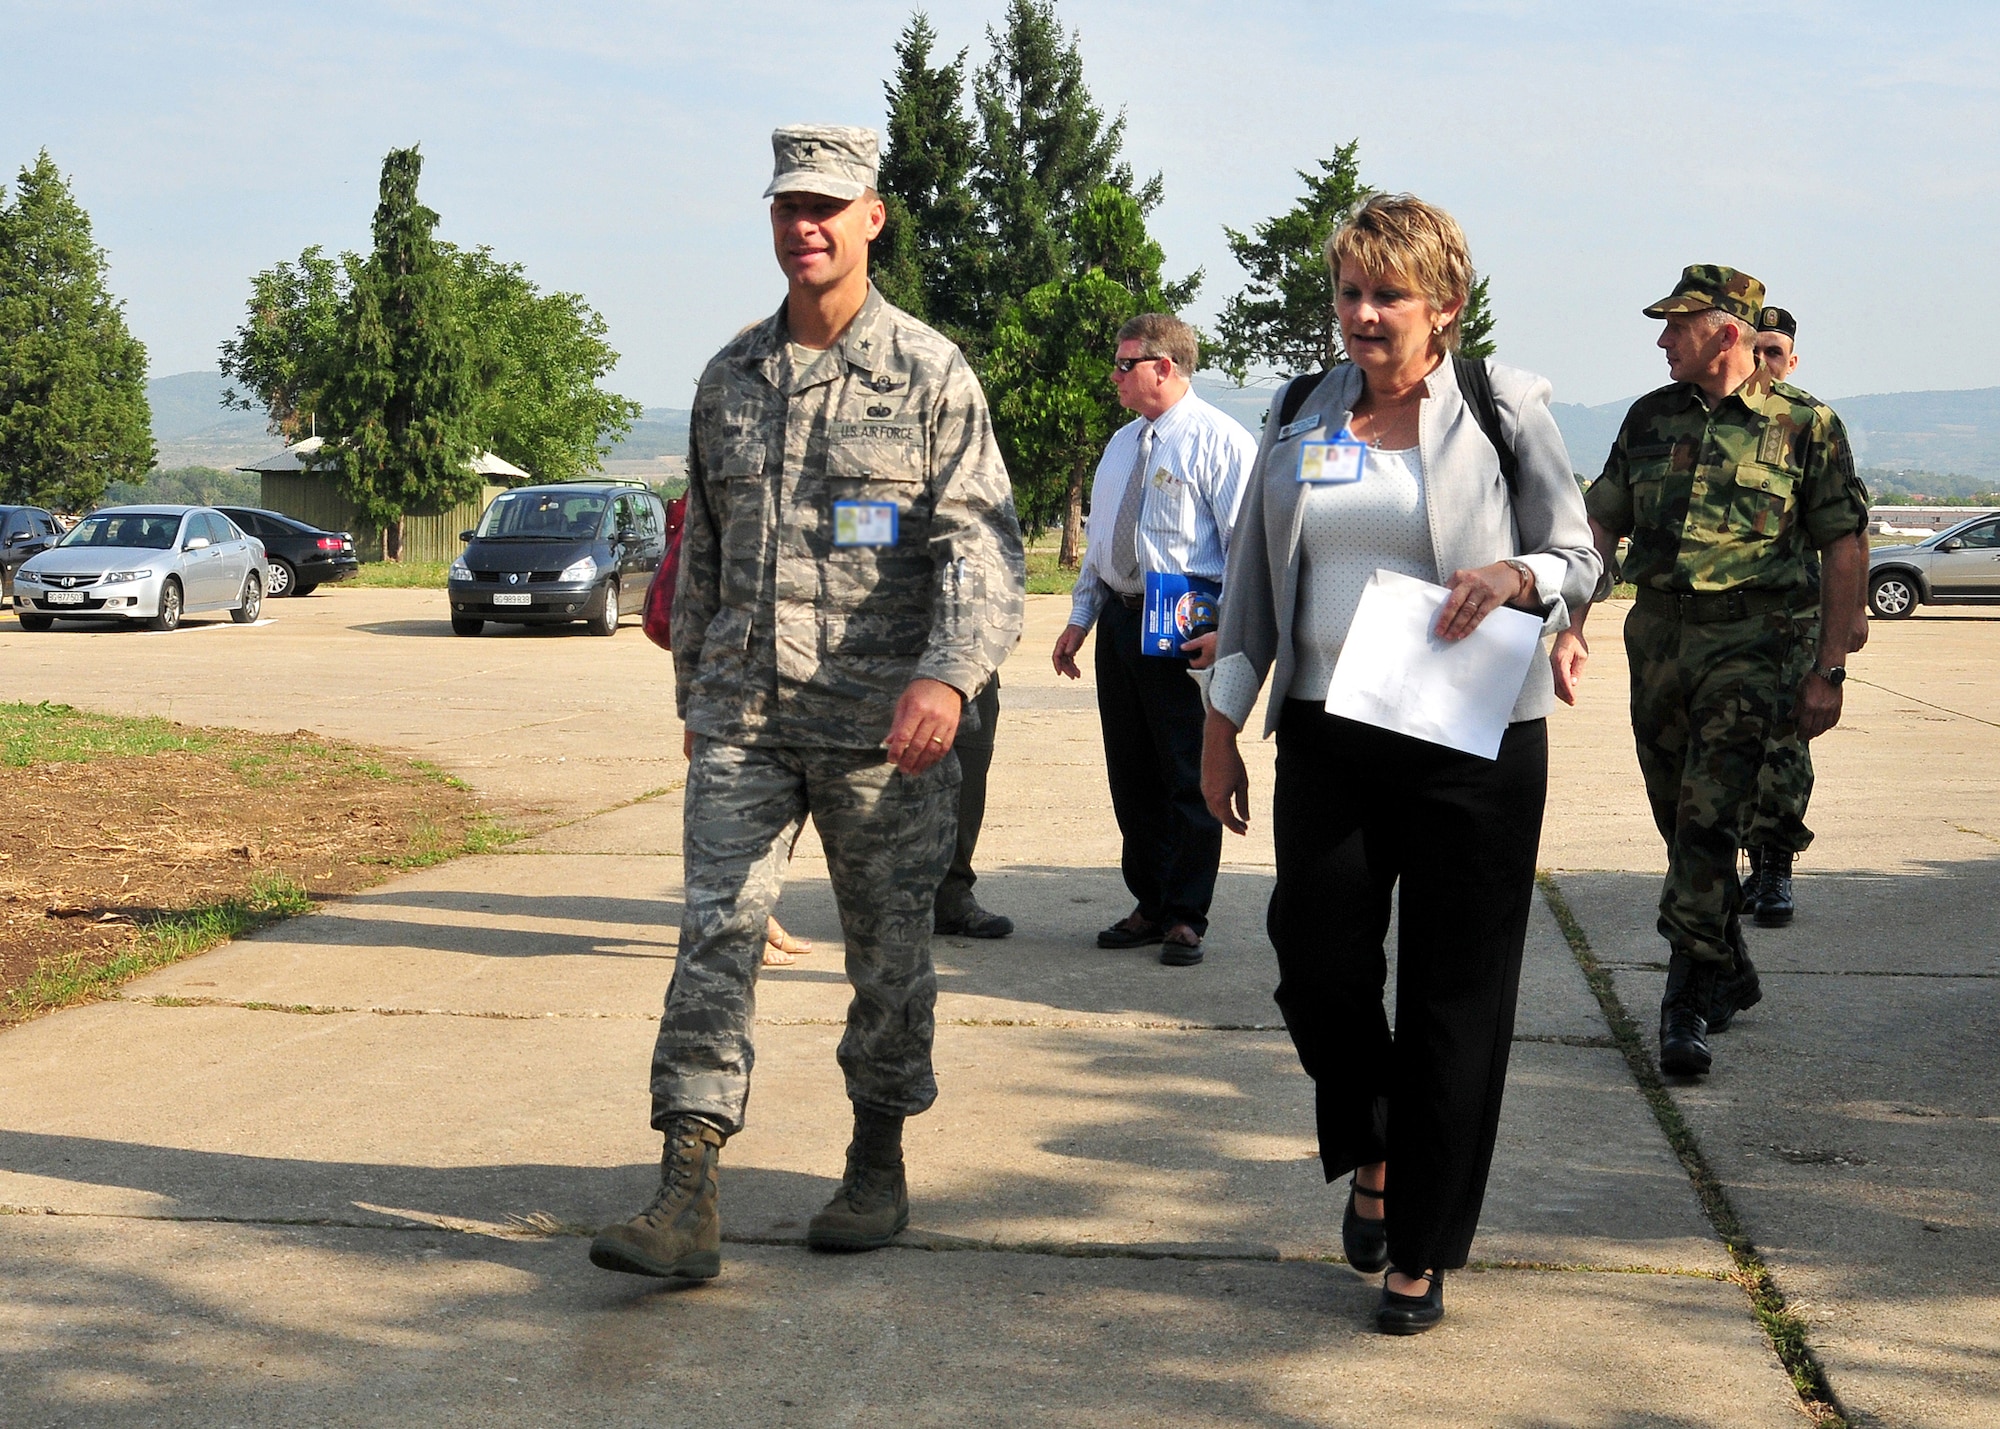 Brig. Gen. Mark Dillon, 86th Airlift Wing commander, and Maxine Fouks, 86th AW Protocol chief, walk through the exercise area as part of the MEDCEUR 09 distinguished visitors' day in Nis, Serbia, Sept. 10, 2009. MEDCEUR is an annual joint and combined medical exercise with a focus on major disaster response and mass casualty situations. More than 700 exercise participants from 15 countries are taking part in this year’s exercise, which is hosted by Serbia. (U.S. Air Force photo by Staff Sgt. Markus M. Maier)